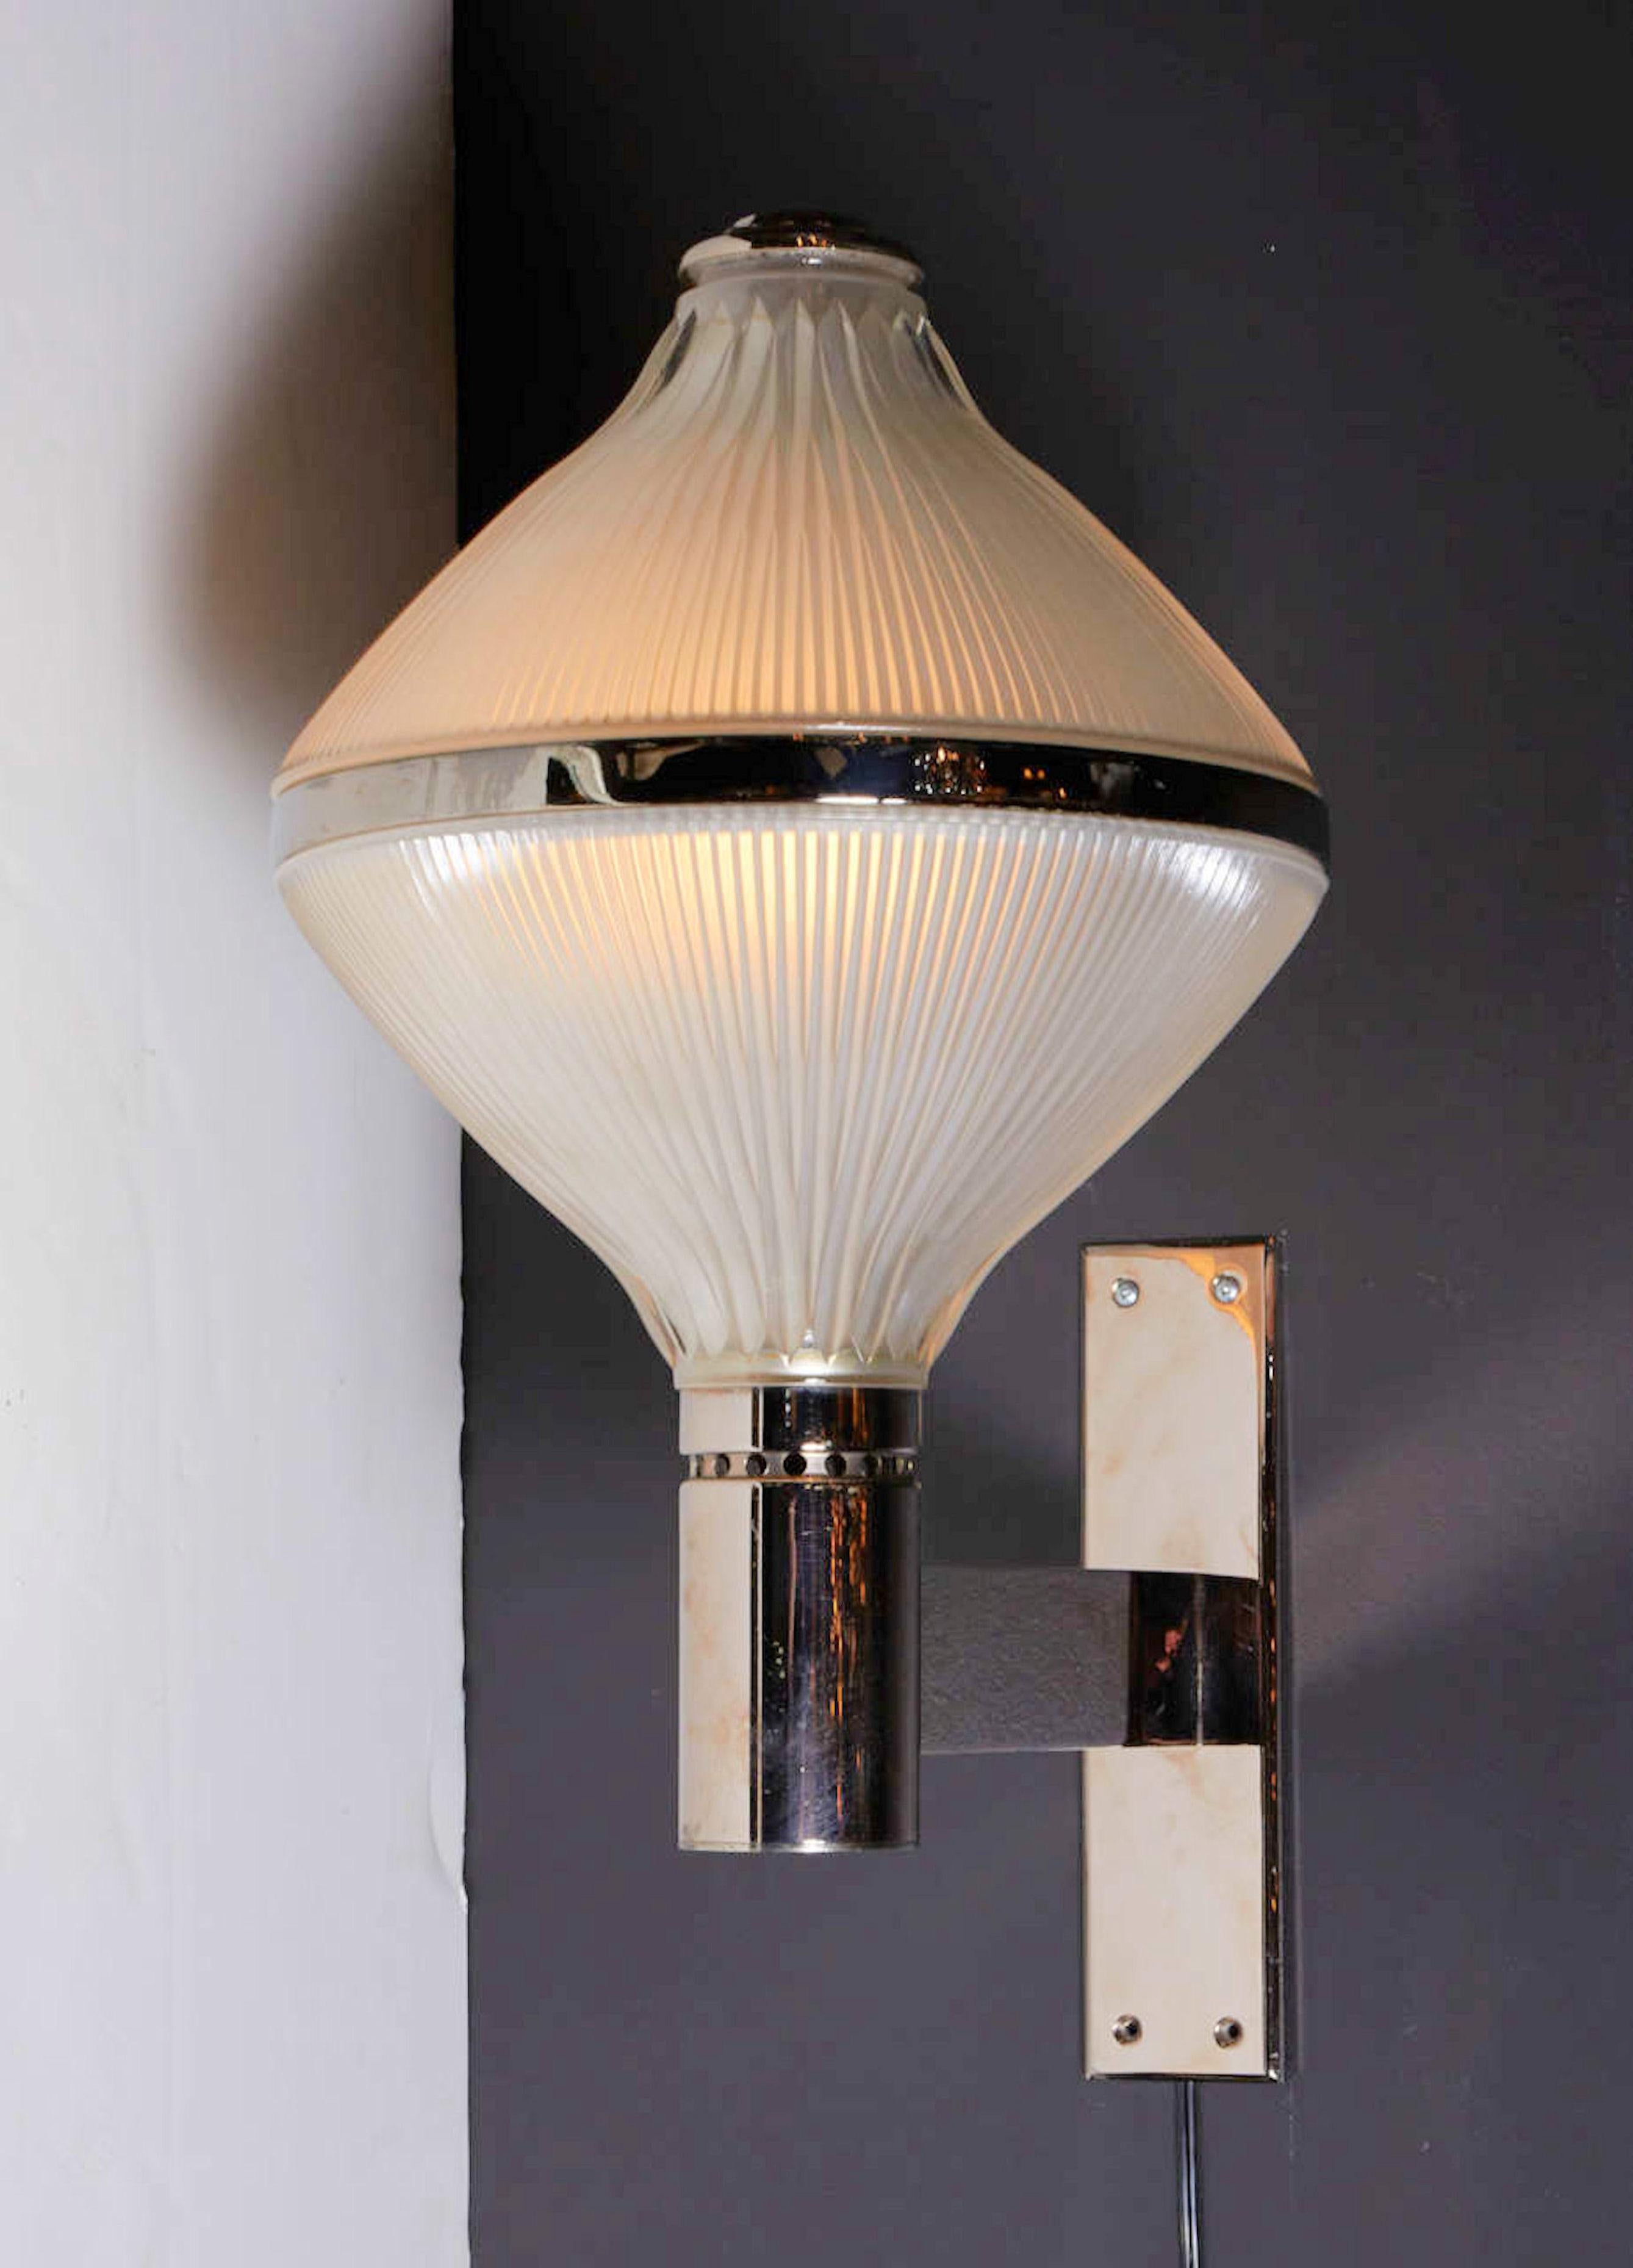 Pair of midcentury lanterns or wall sconces designed by Studio BBPR for Artemide, in Italy, circa 1960s.
With spherical domes and a modern Industrial inspired design.
Frosted glass up and down fully lighted, and silver plated mounts.
Rewired: 2